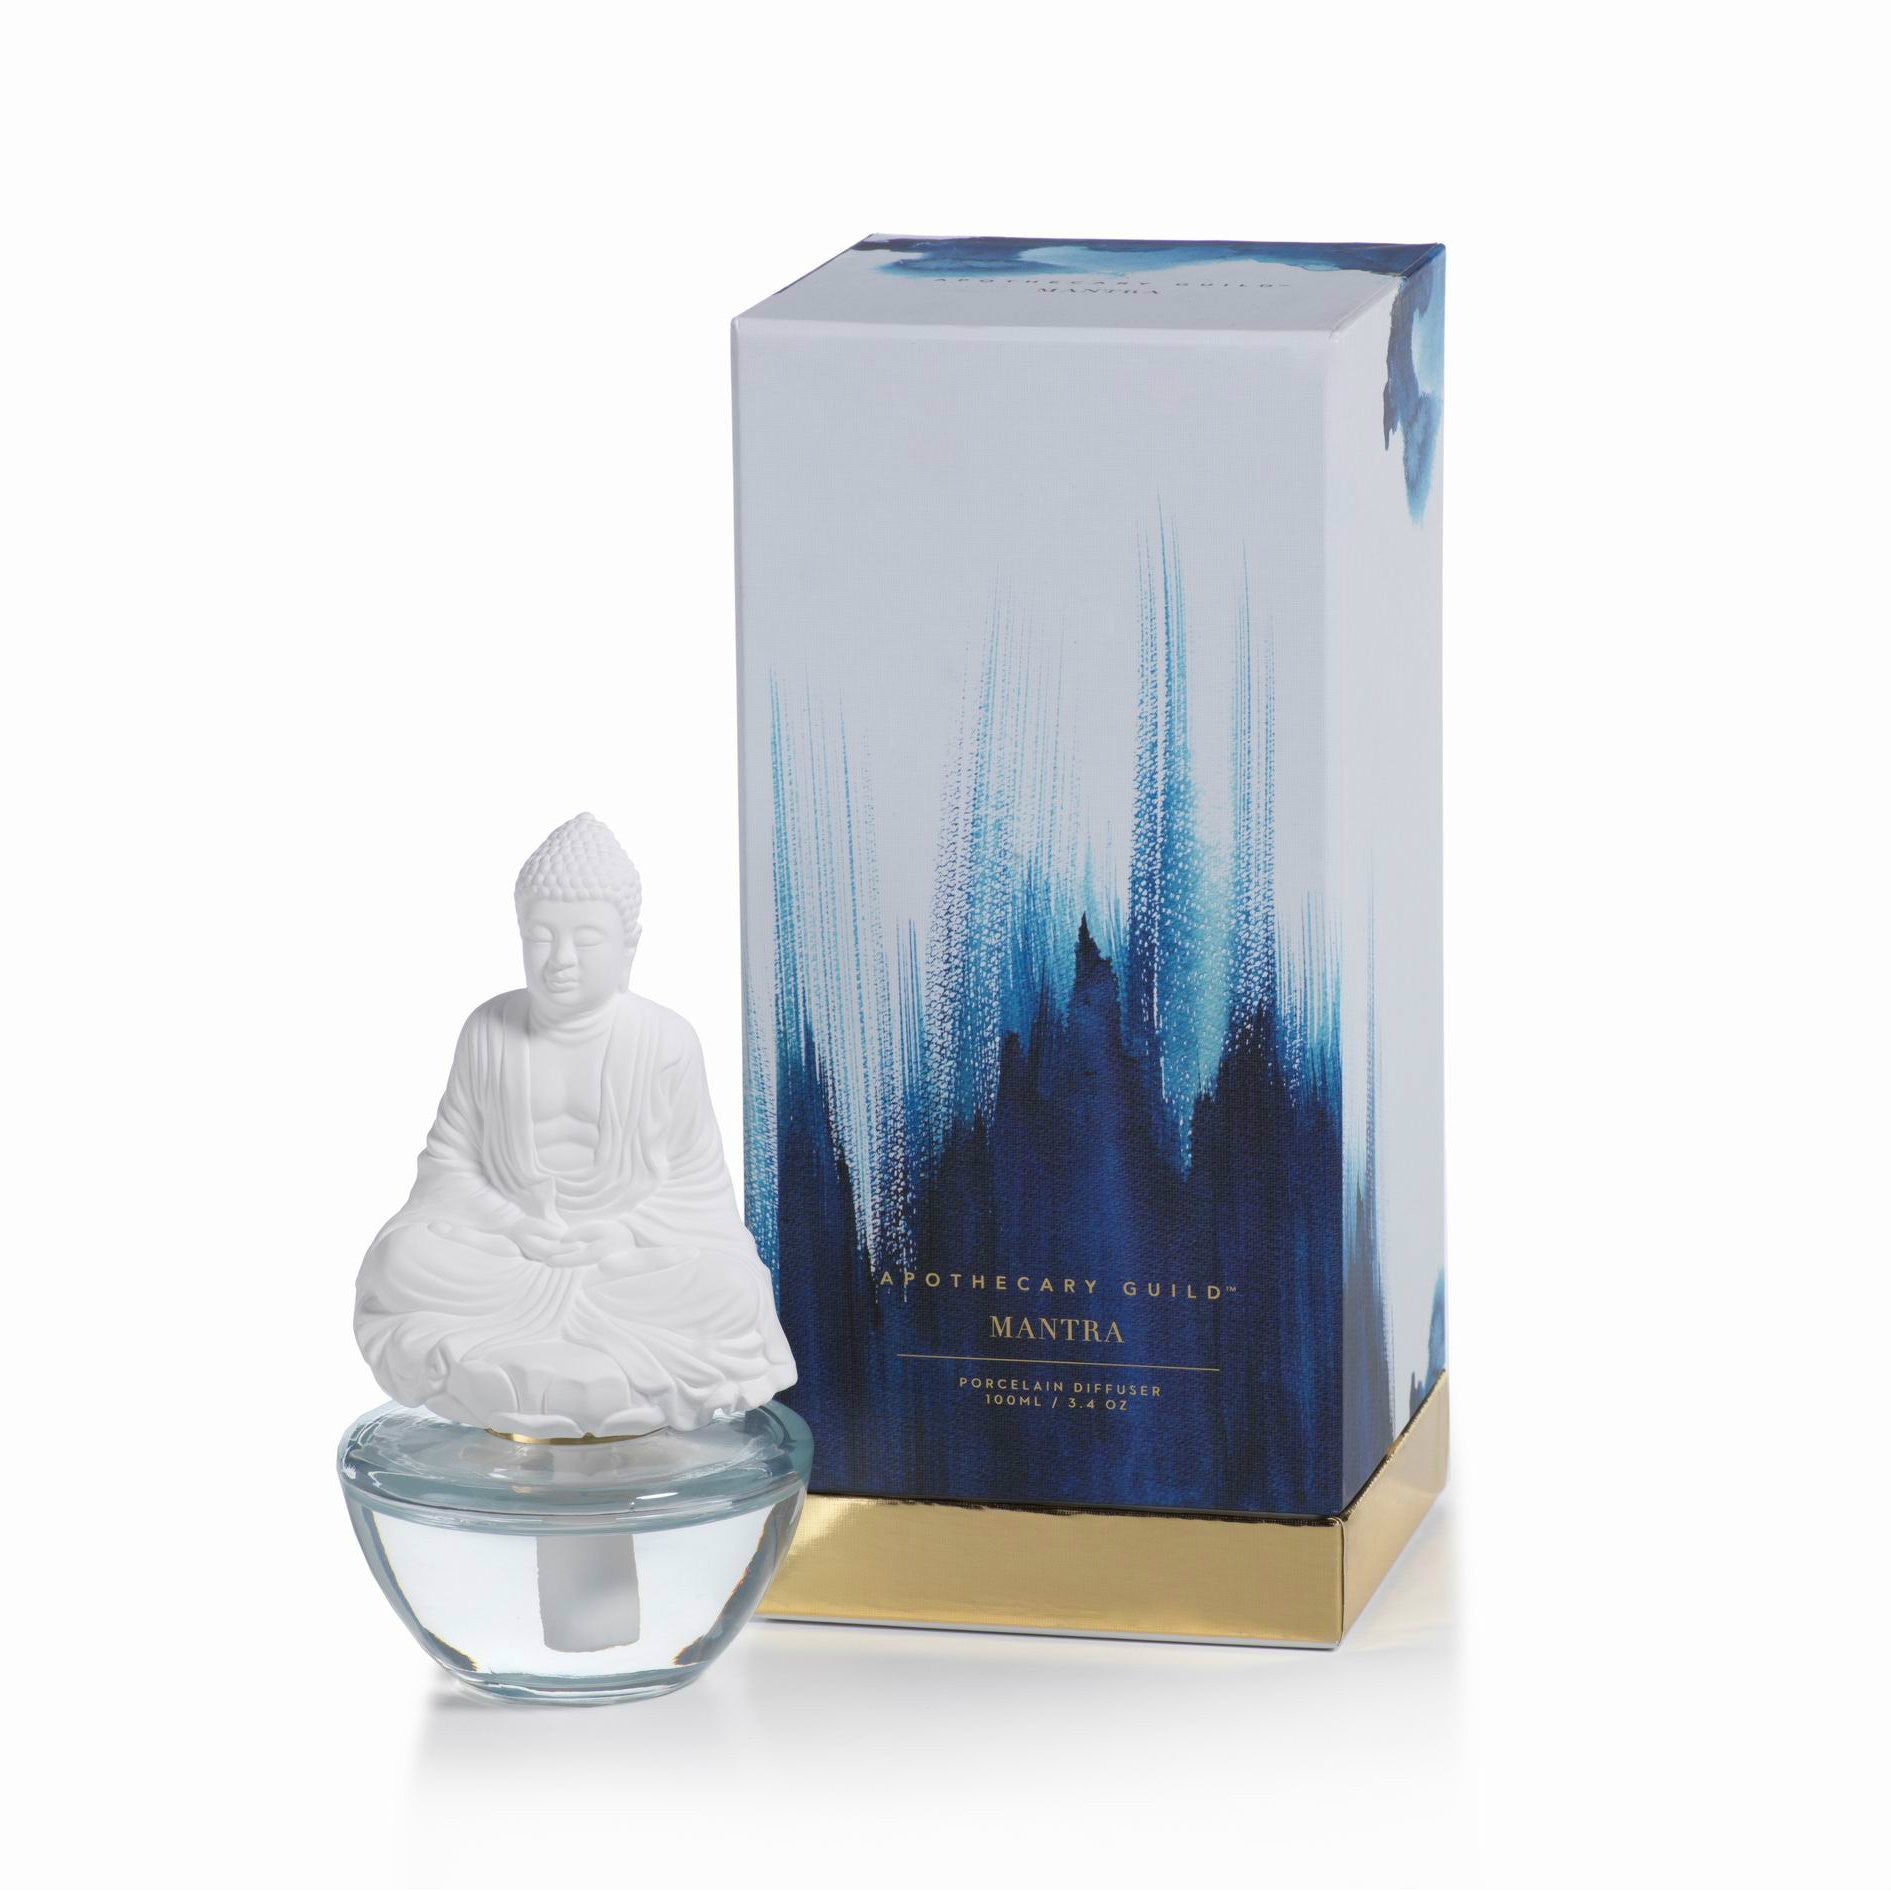 Apothecary Guild Mantra Buddha Porcelain Diffuser - Blue Lotus - CARLYLE AVENUE